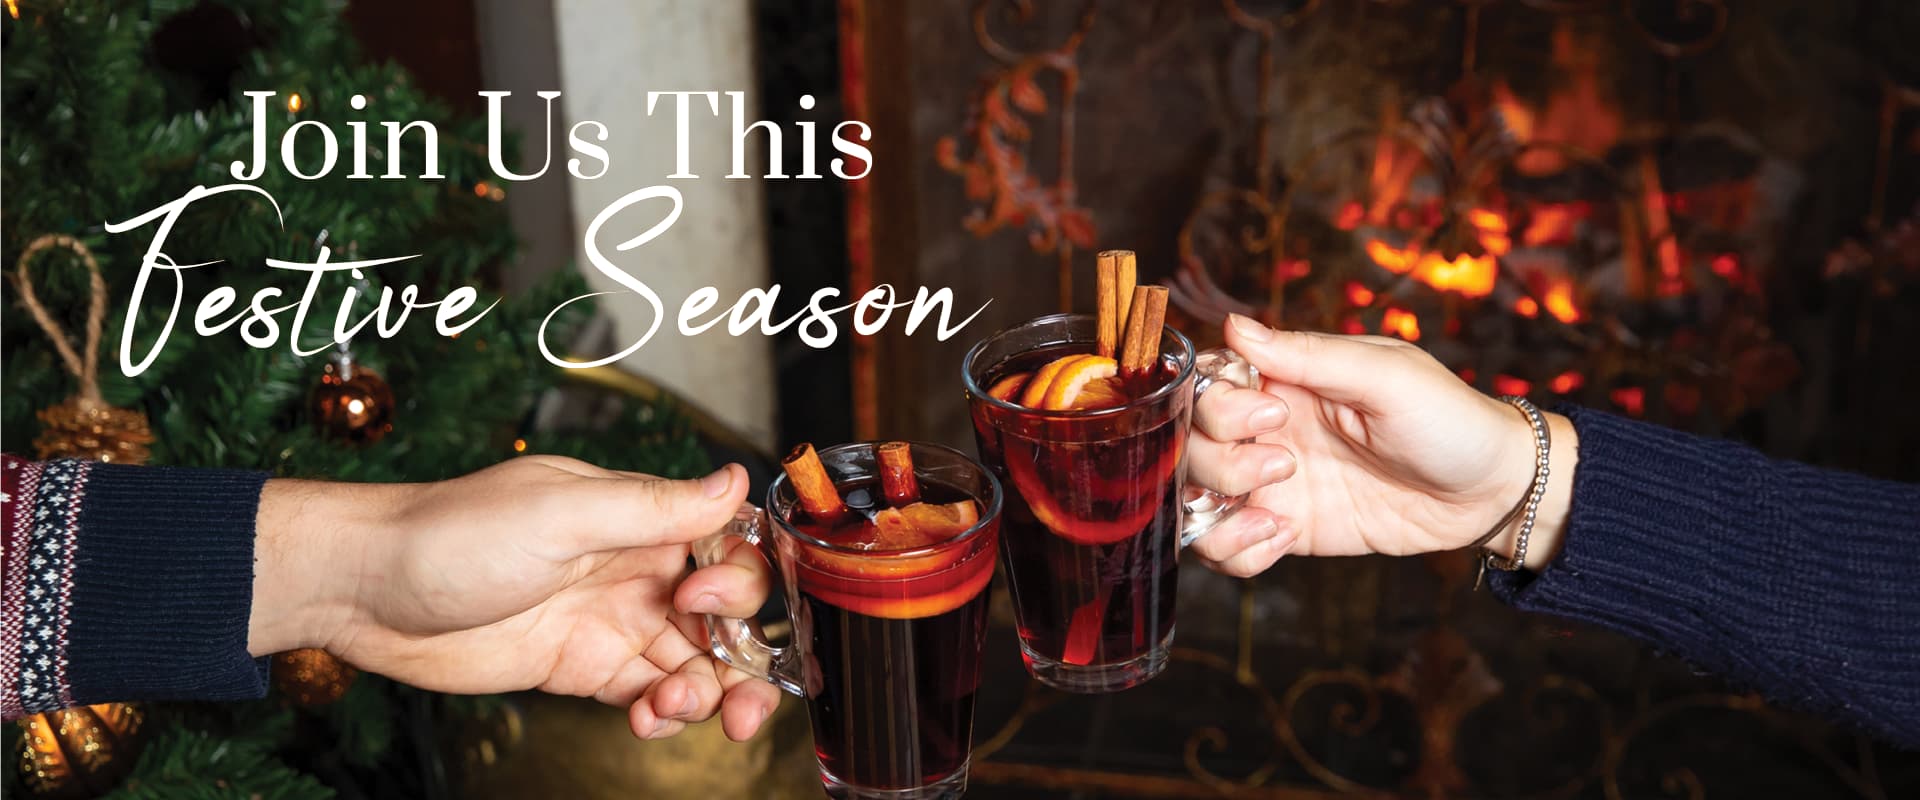 Join us this festive season | Mulled wine